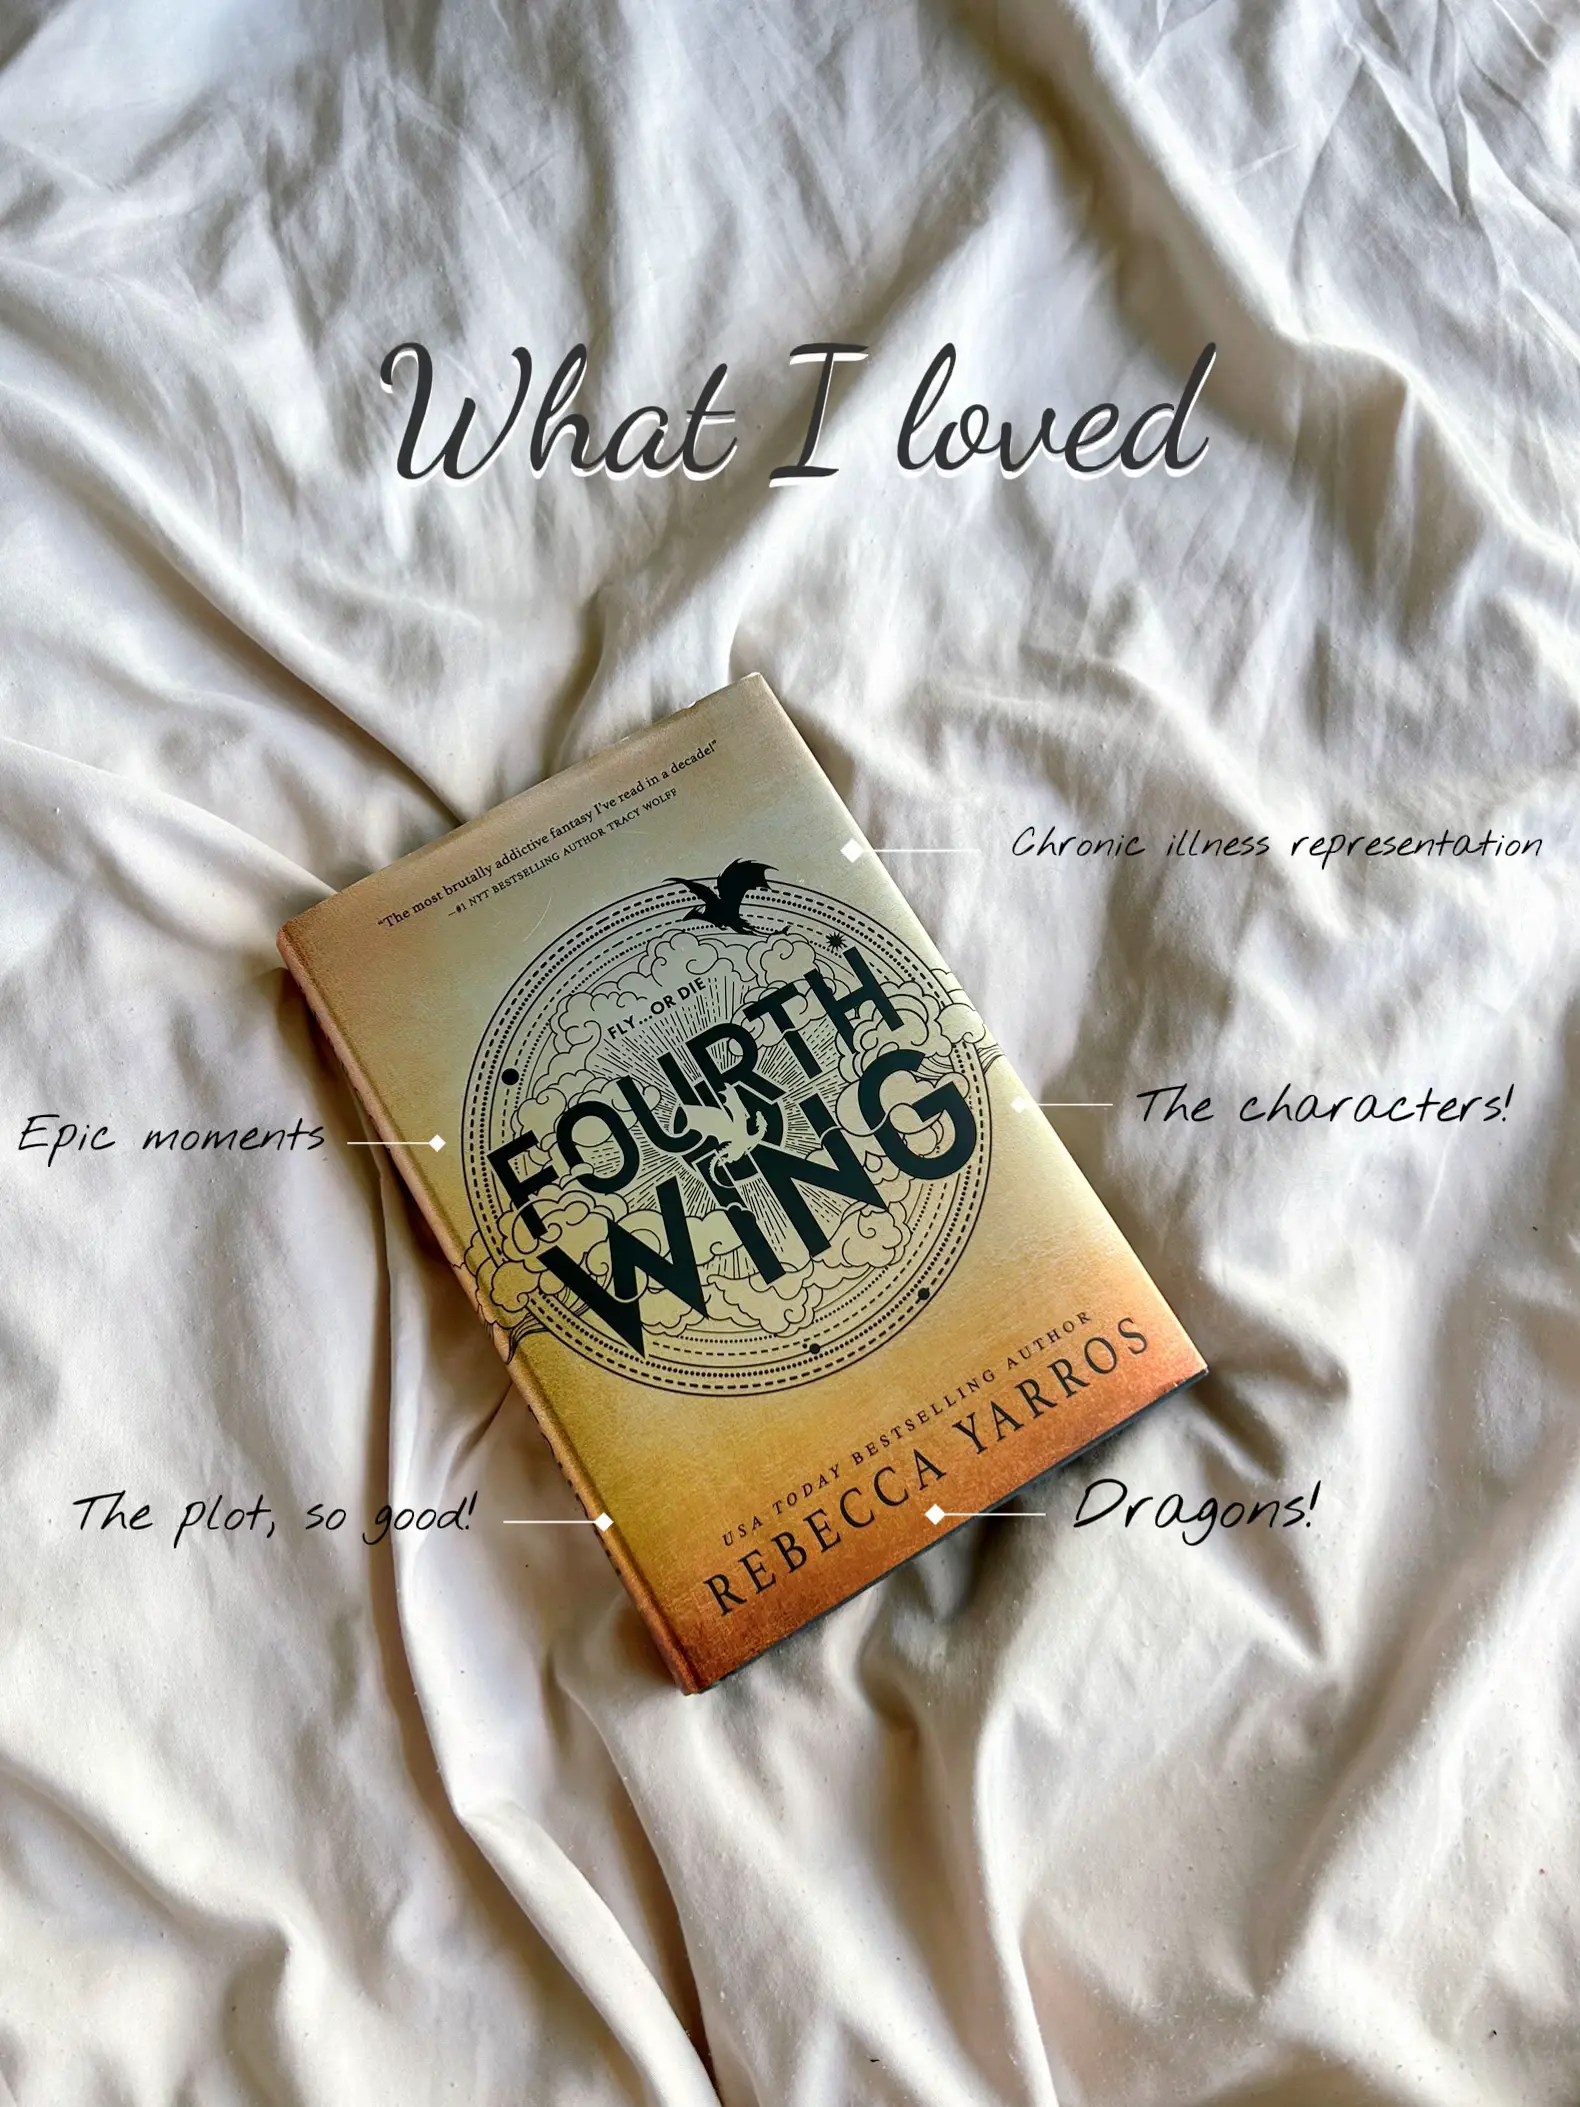 Fourth Wing Review, Gallery posted by sophie mae